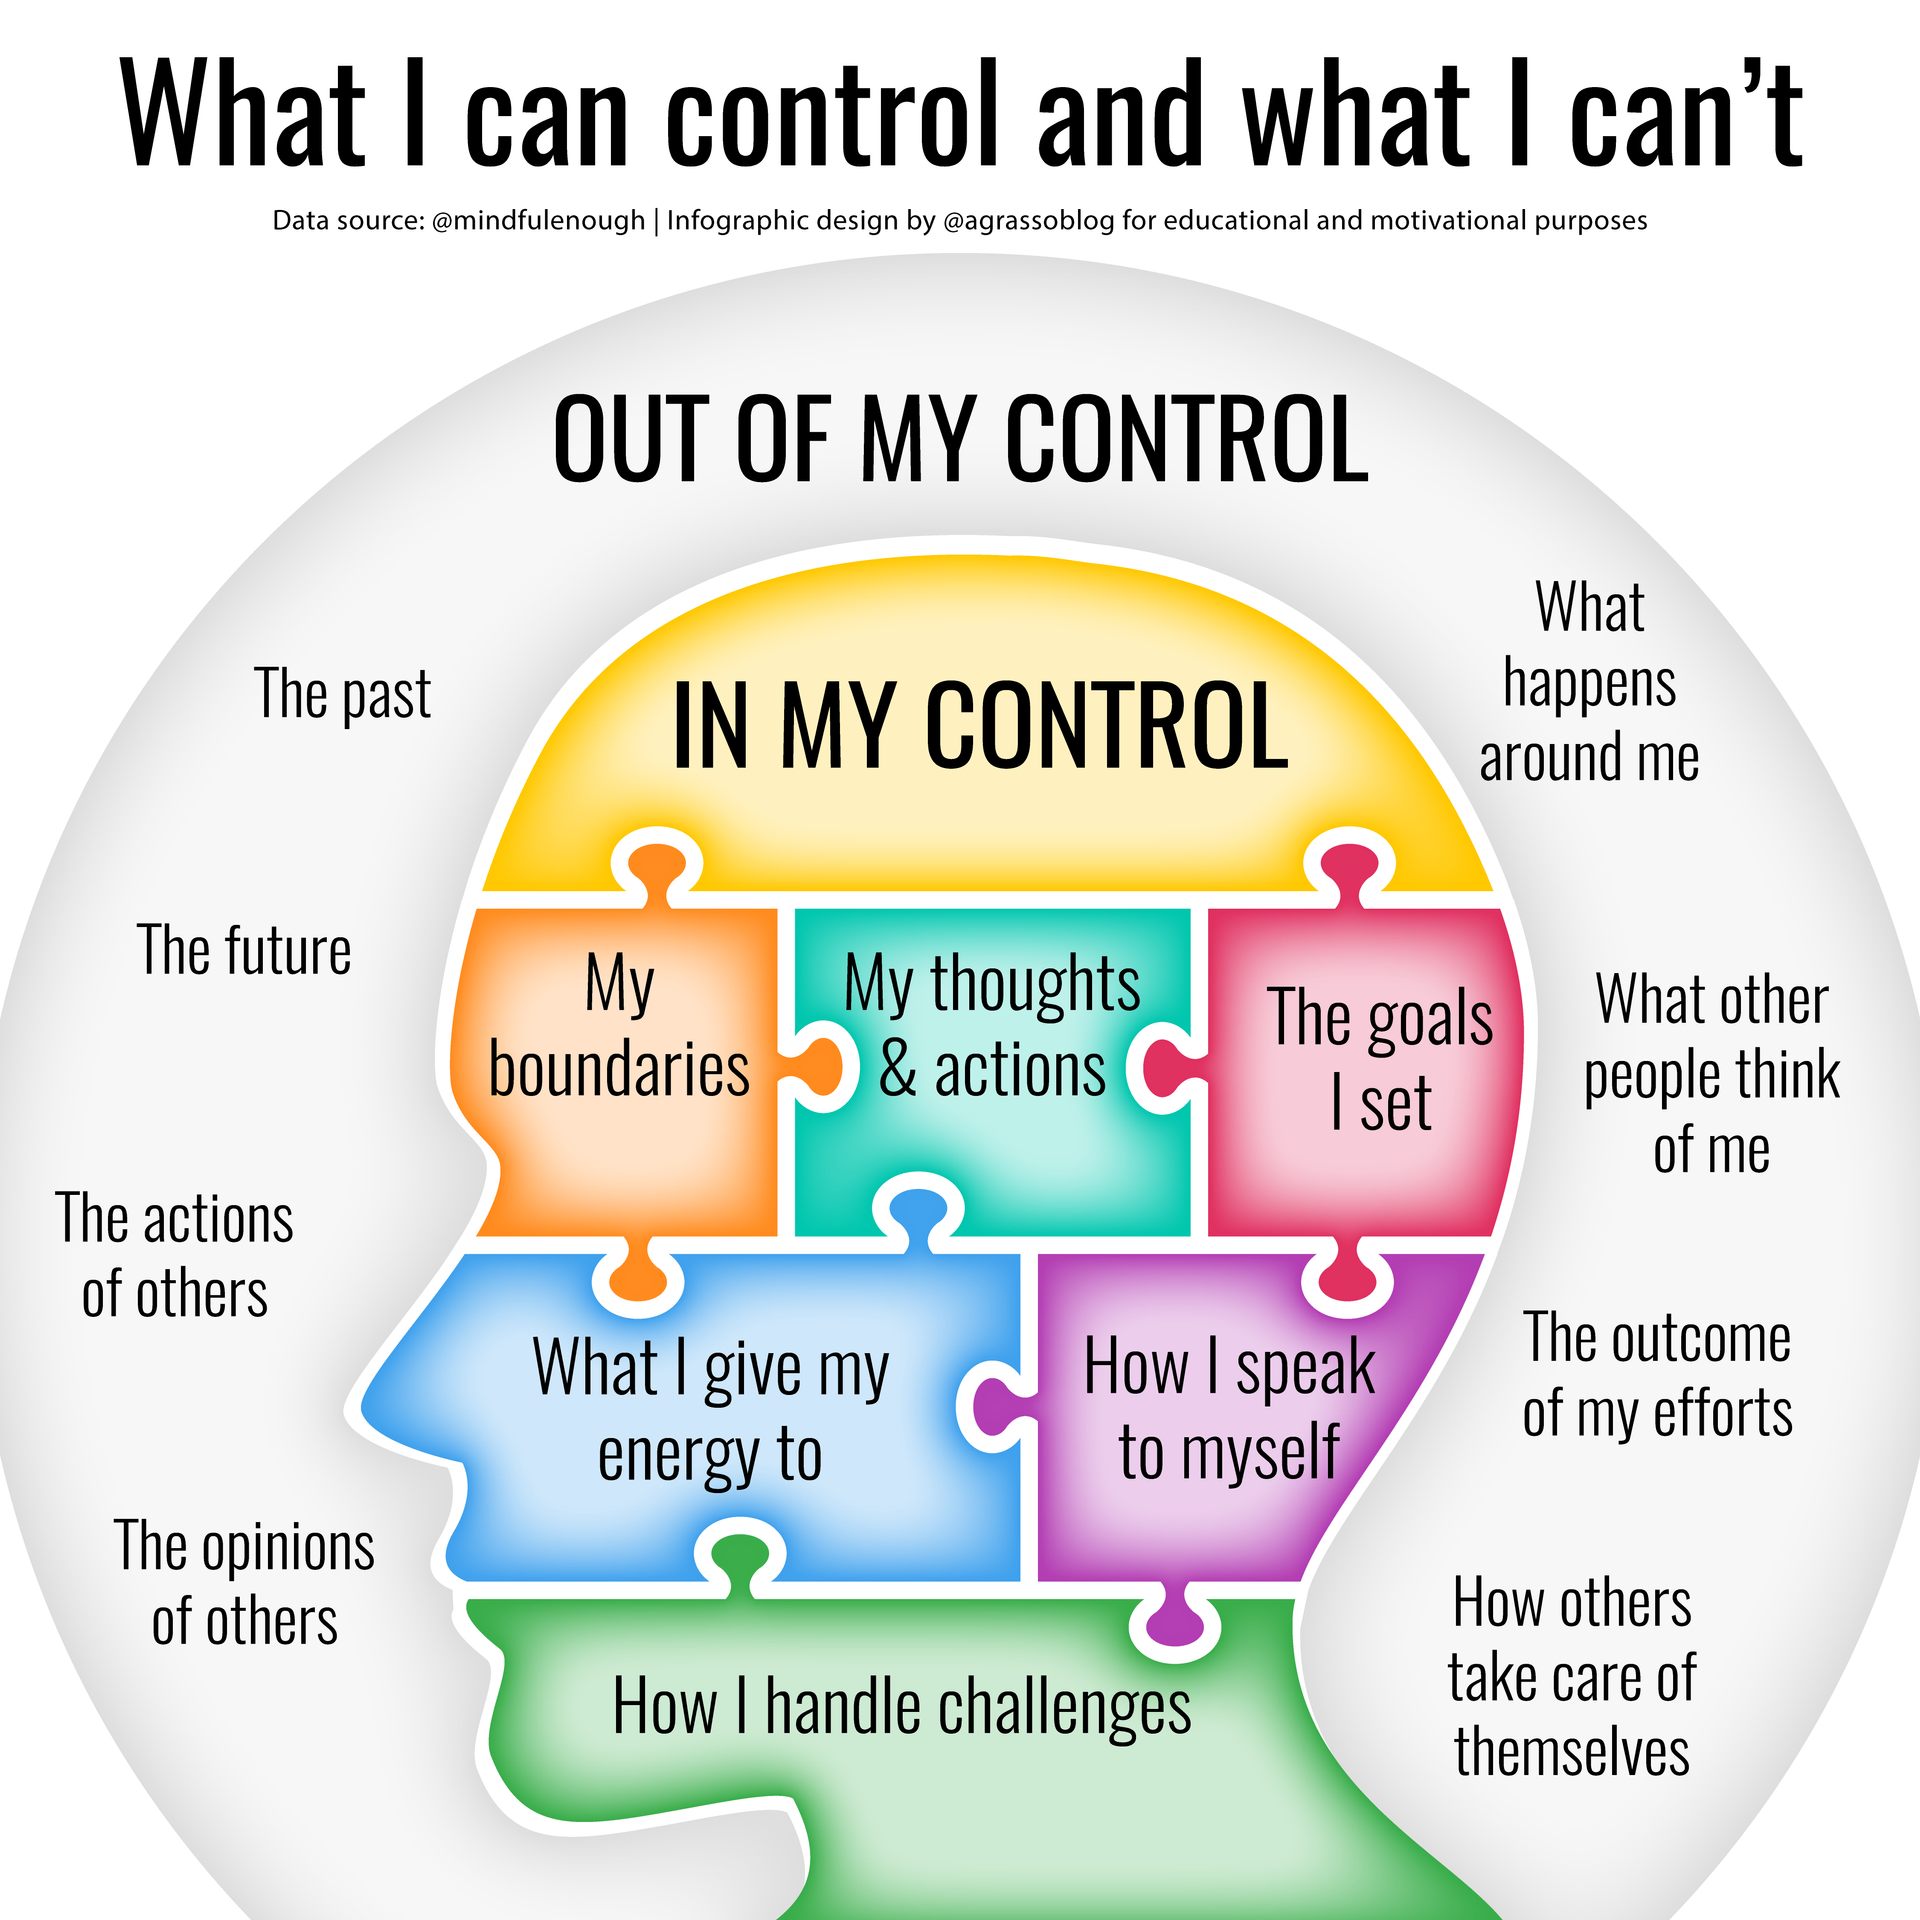 "What I can control and what I can't"